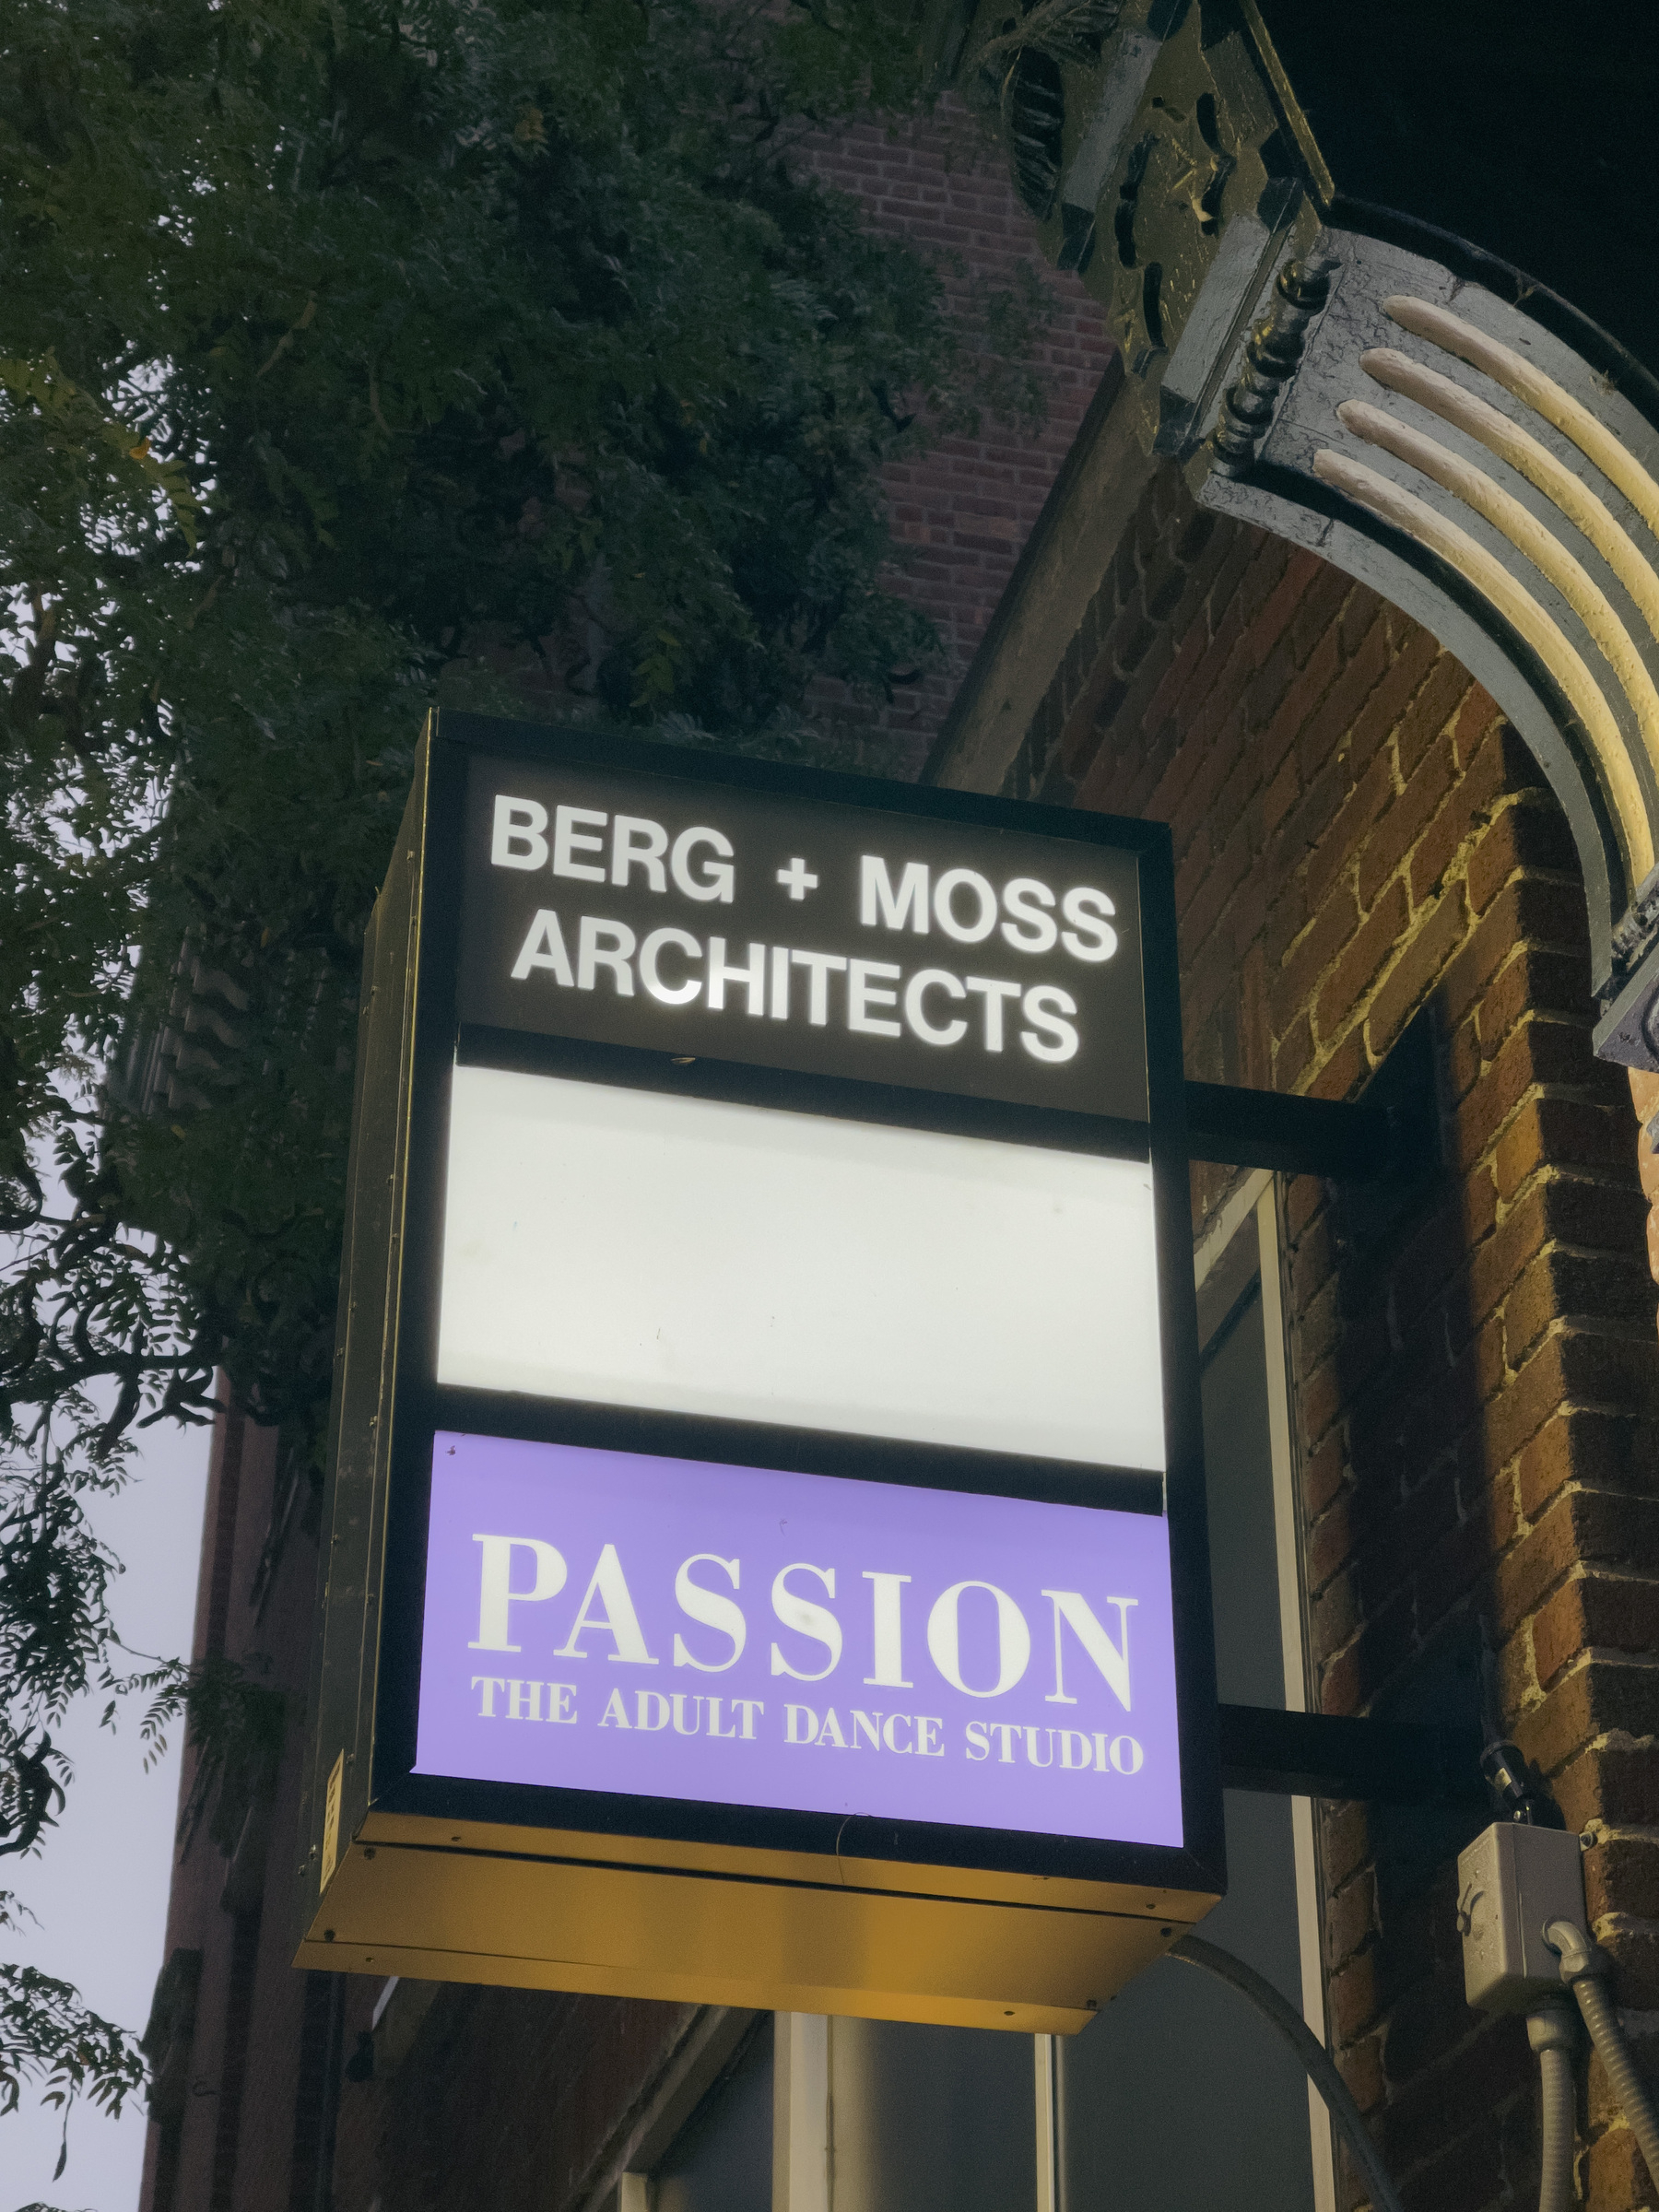 Business signage for Moss Architects and Passion Adult Dance Studio.